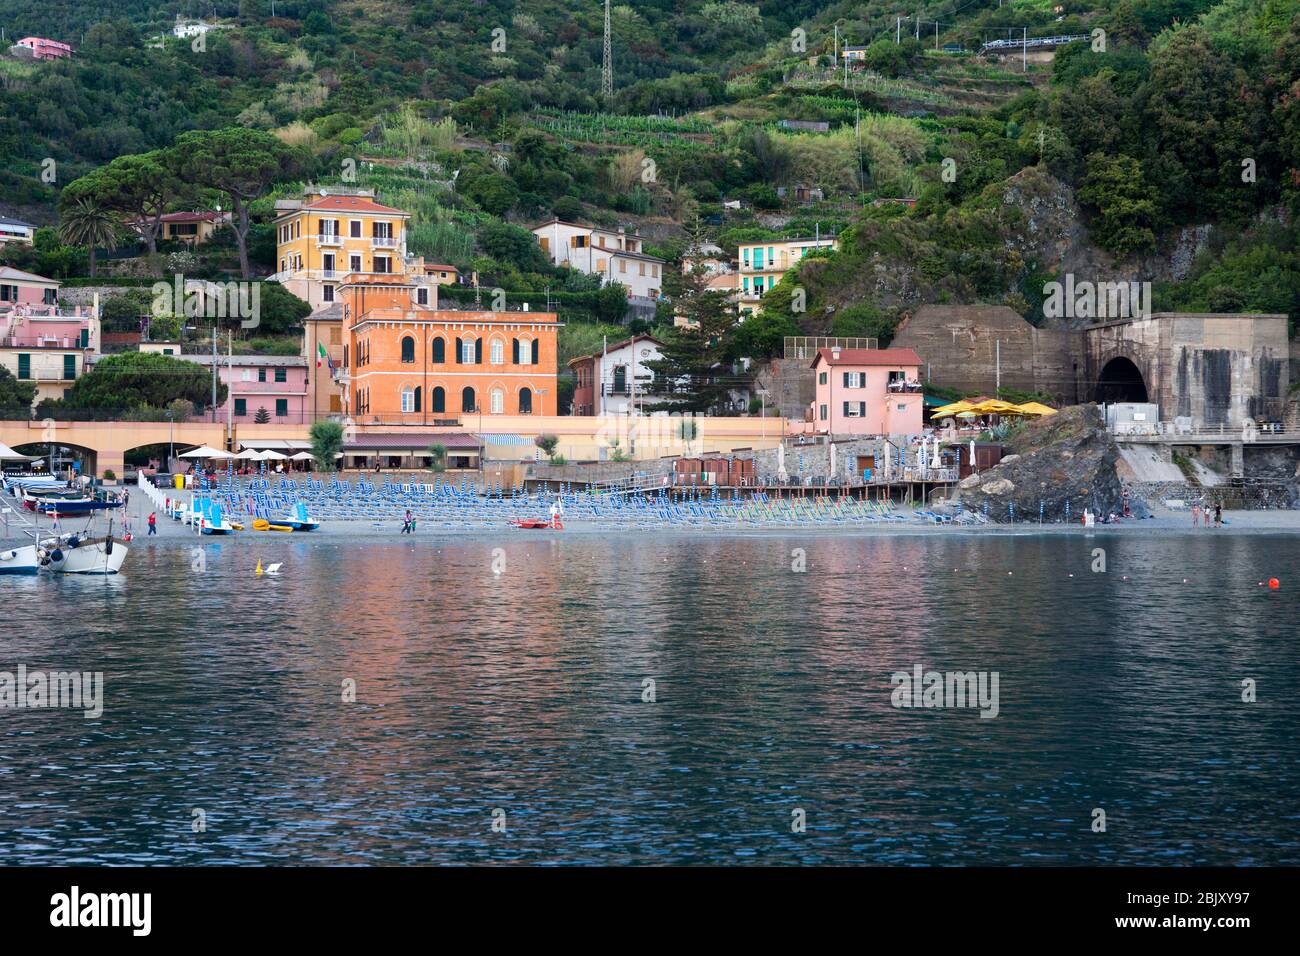 Ocean front view of seaside village of Monterosso, Cinque Terre, Italy Stock Photo